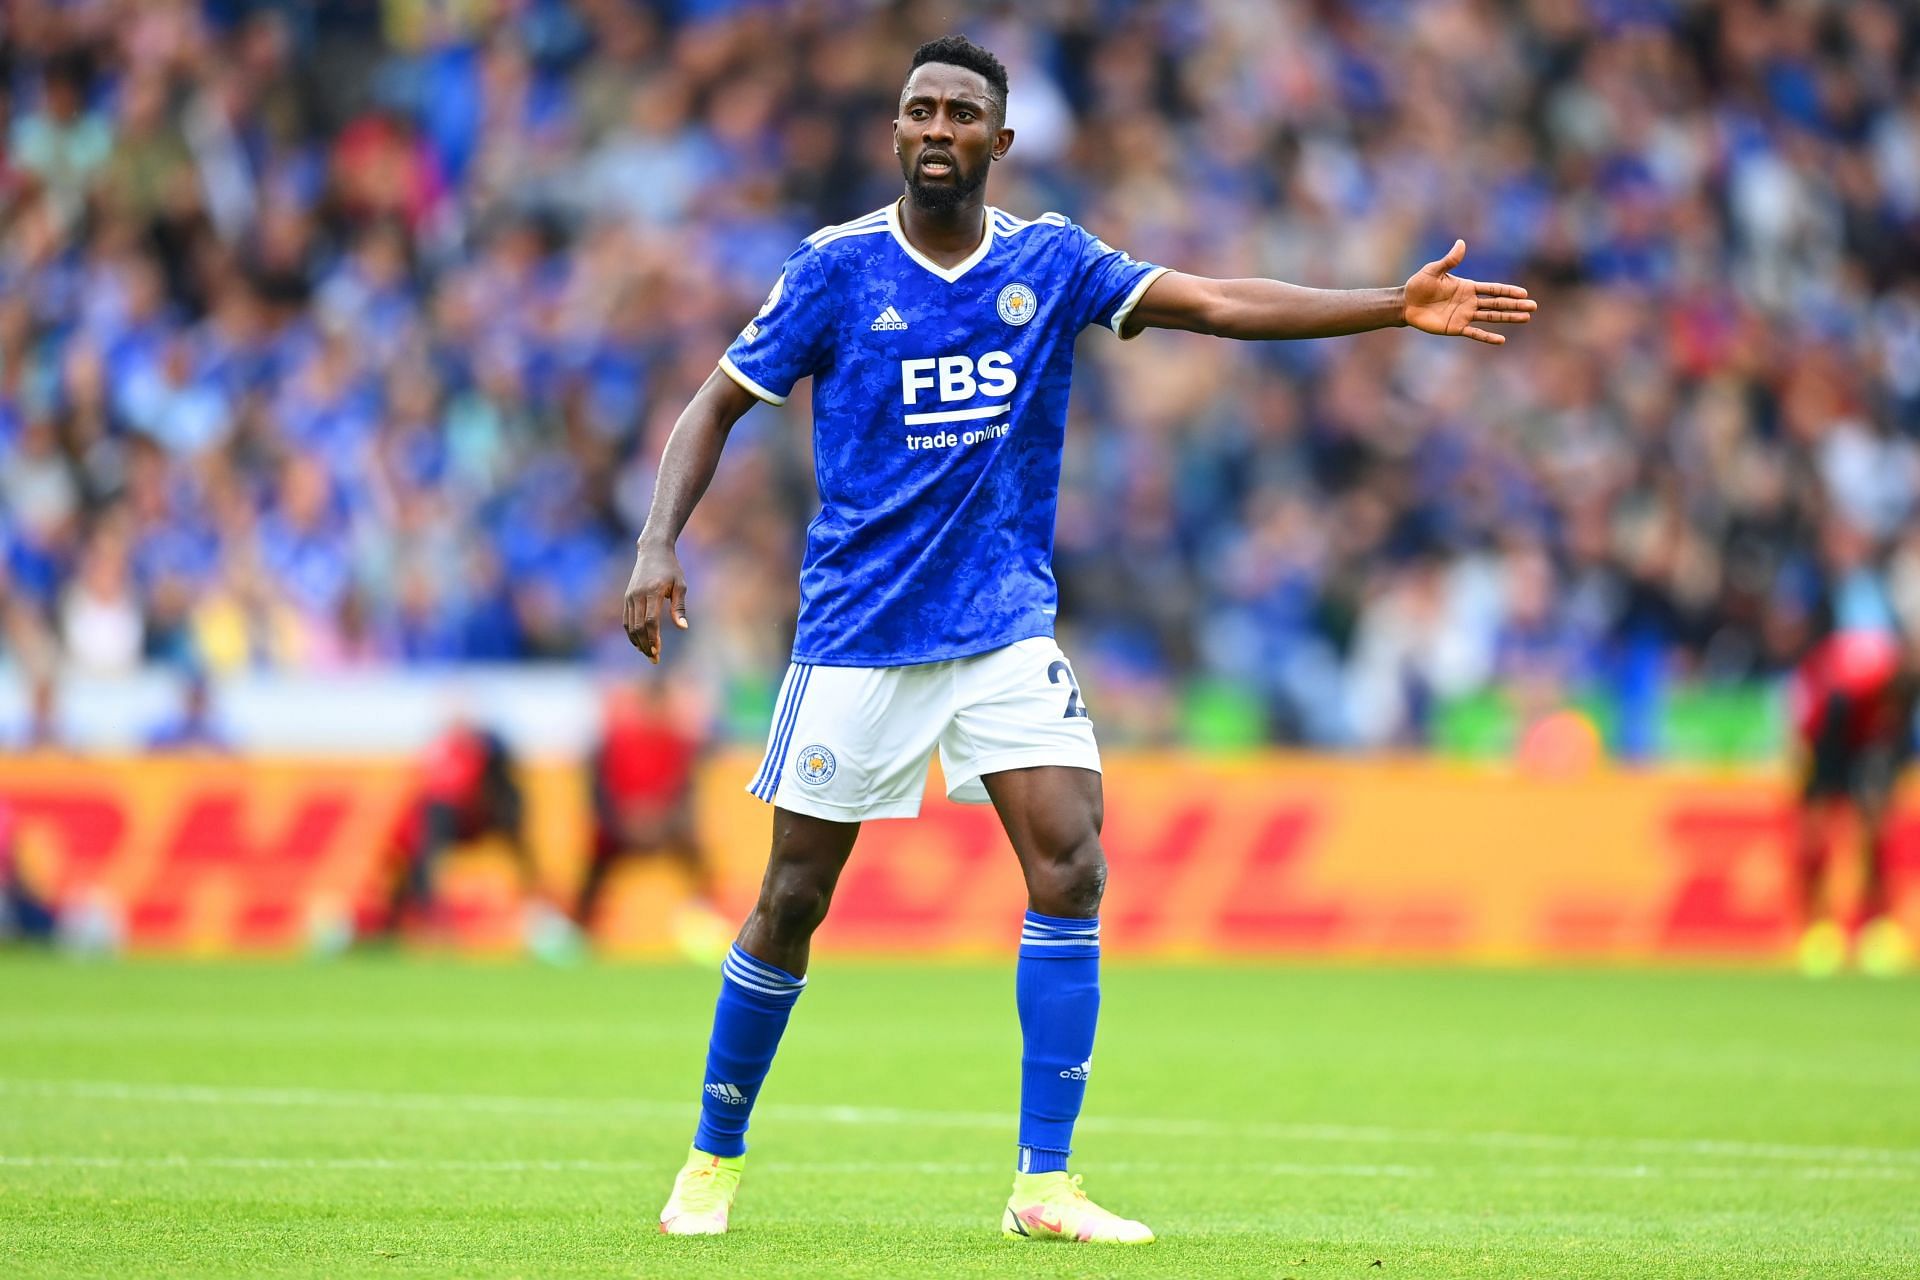 Manchester United are reportedly ready to go all out to sign Wilfred Ndidi in January